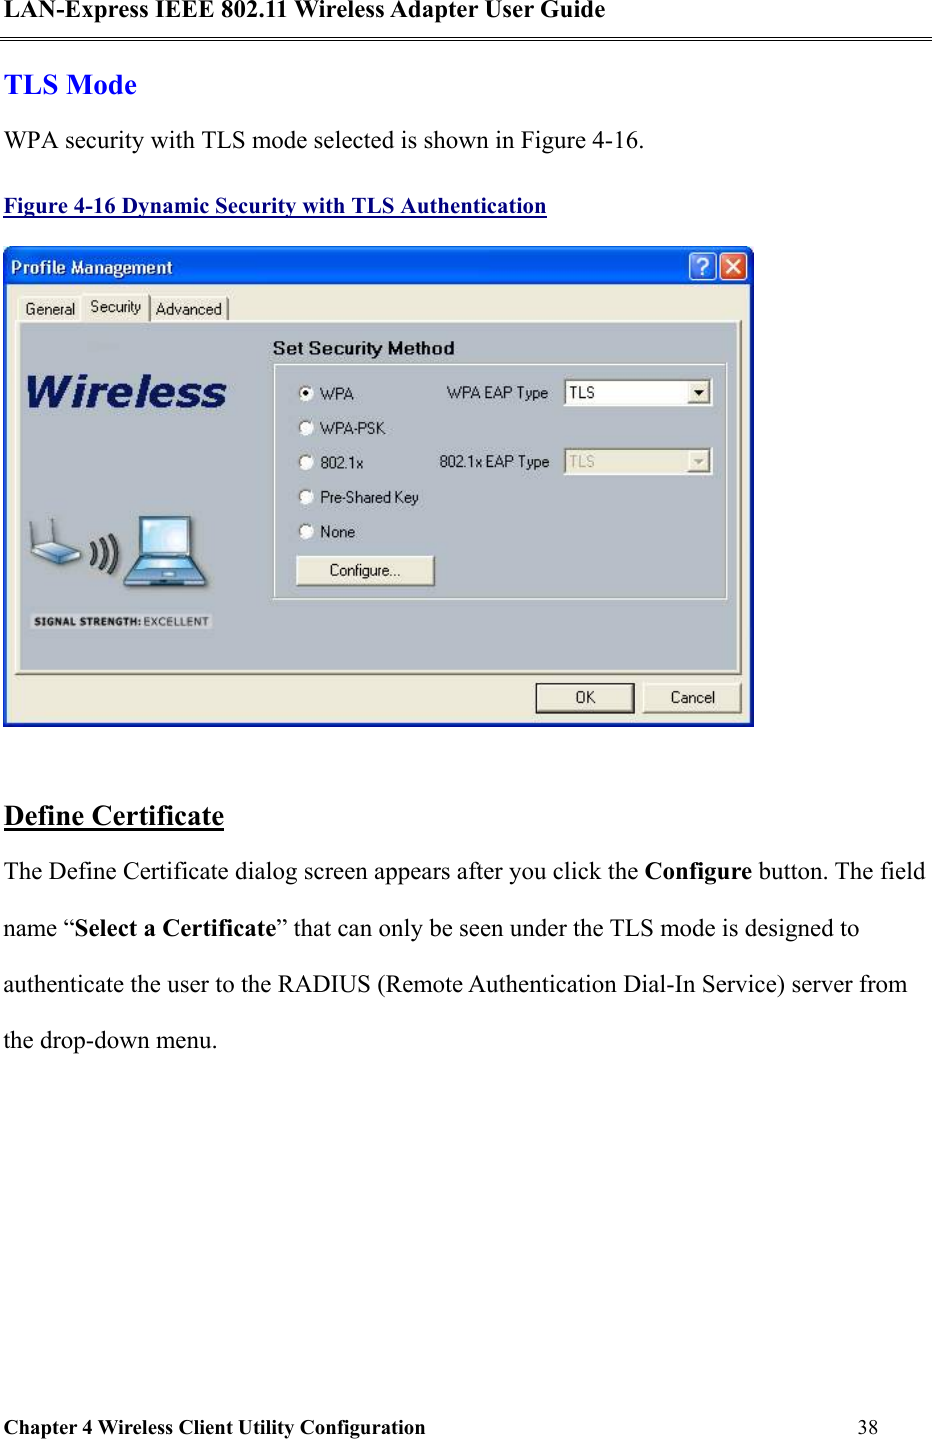 LAN-Express IEEE 802.11 Wireless Adapter User Guide Chapter 4 Wireless Client Utility Configuration   38  TLS Mode WPA security with TLS mode selected is shown in Figure 4-16. Figure 4-16 Dynamic Security with TLS Authentication   Define Certificate The Define Certificate dialog screen appears after you click the Configure button. The field name “Select a Certificate” that can only be seen under the TLS mode is designed to authenticate the user to the RADIUS (Remote Authentication Dial-In Service) server from the drop-down menu.  